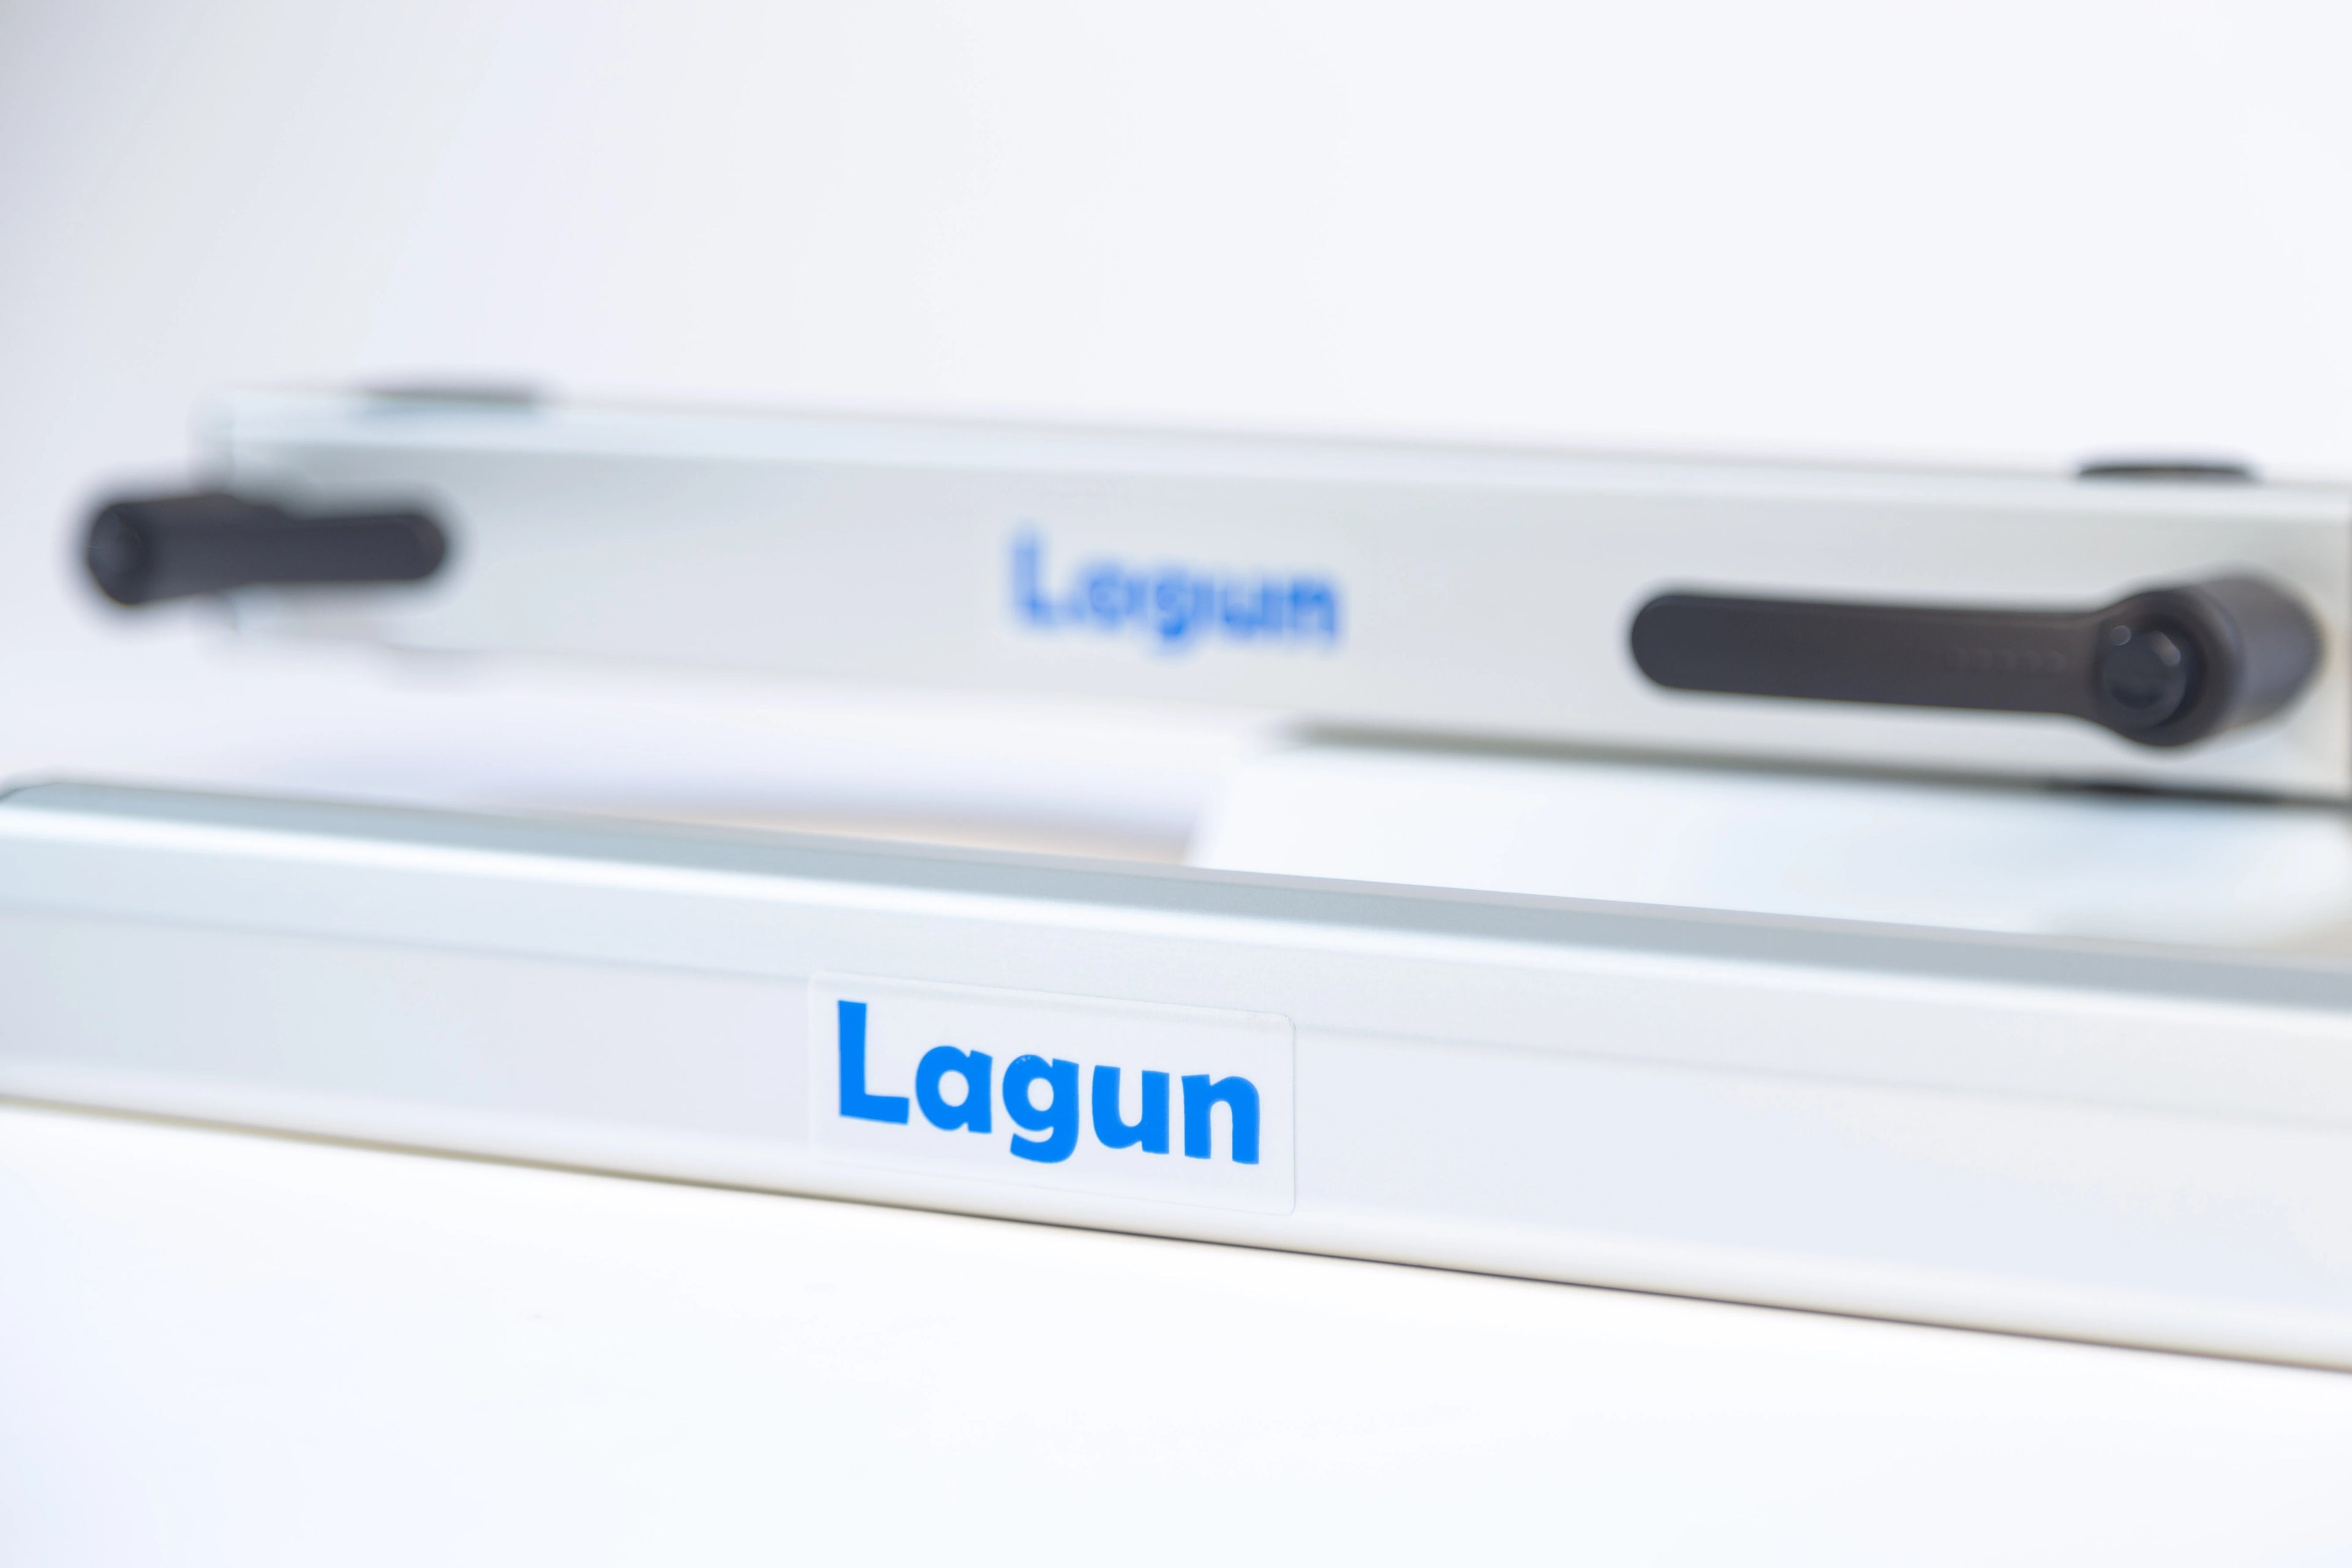 Lagun table frame - flexible table for motorhomes &amp; campers